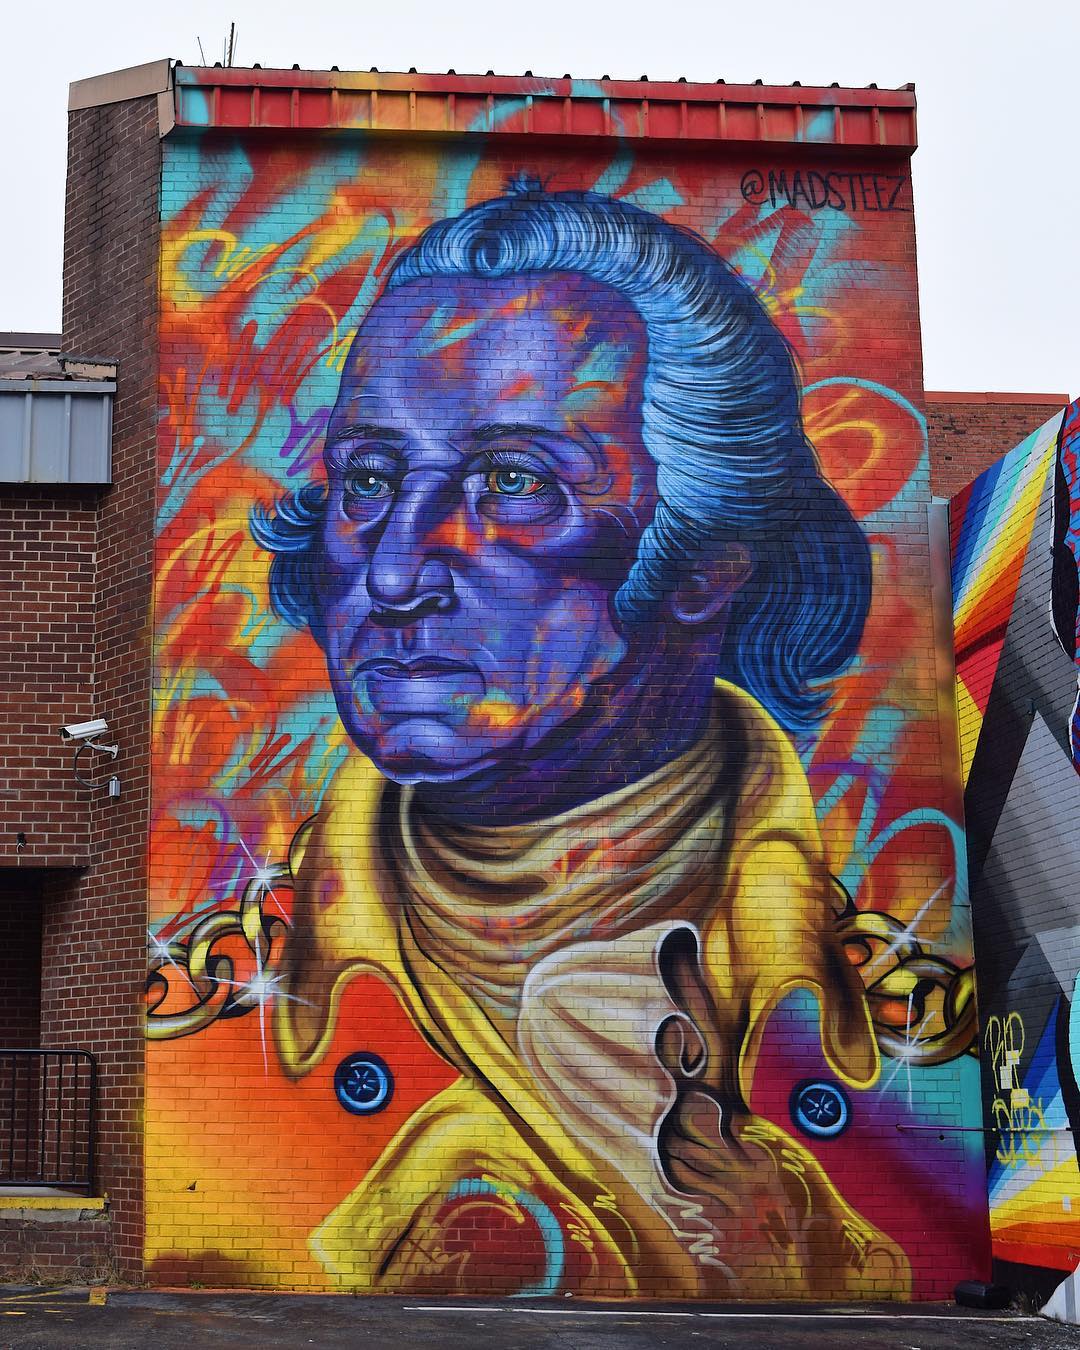 mural in Washington by artist MADSTEEZ. Tagged: George Washington, political